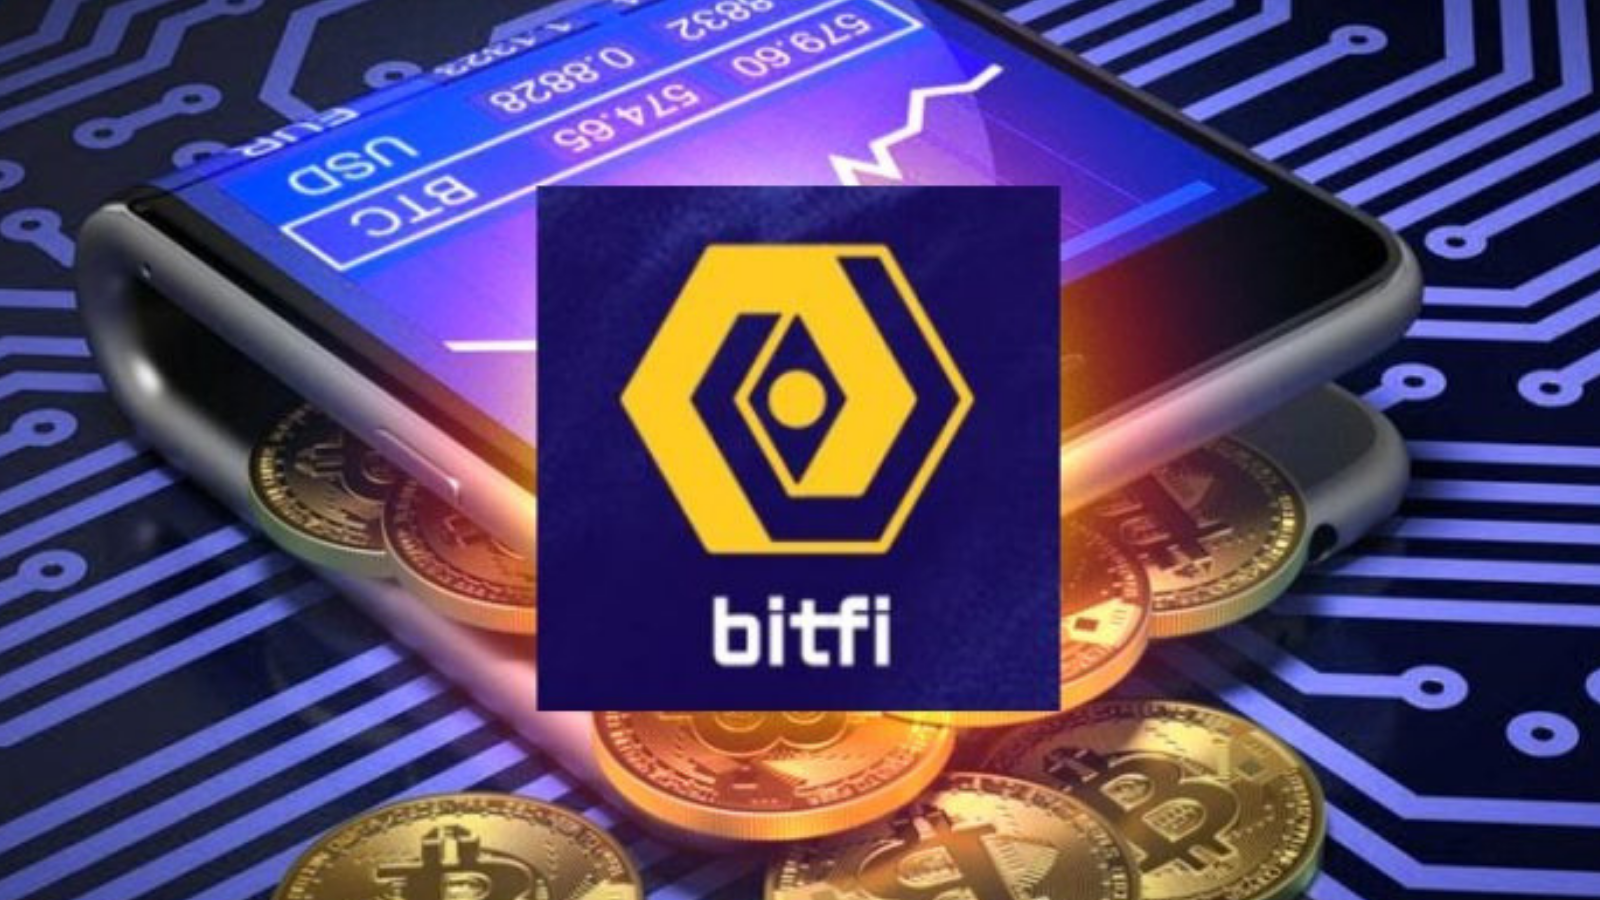 bitfid cryptocurrency